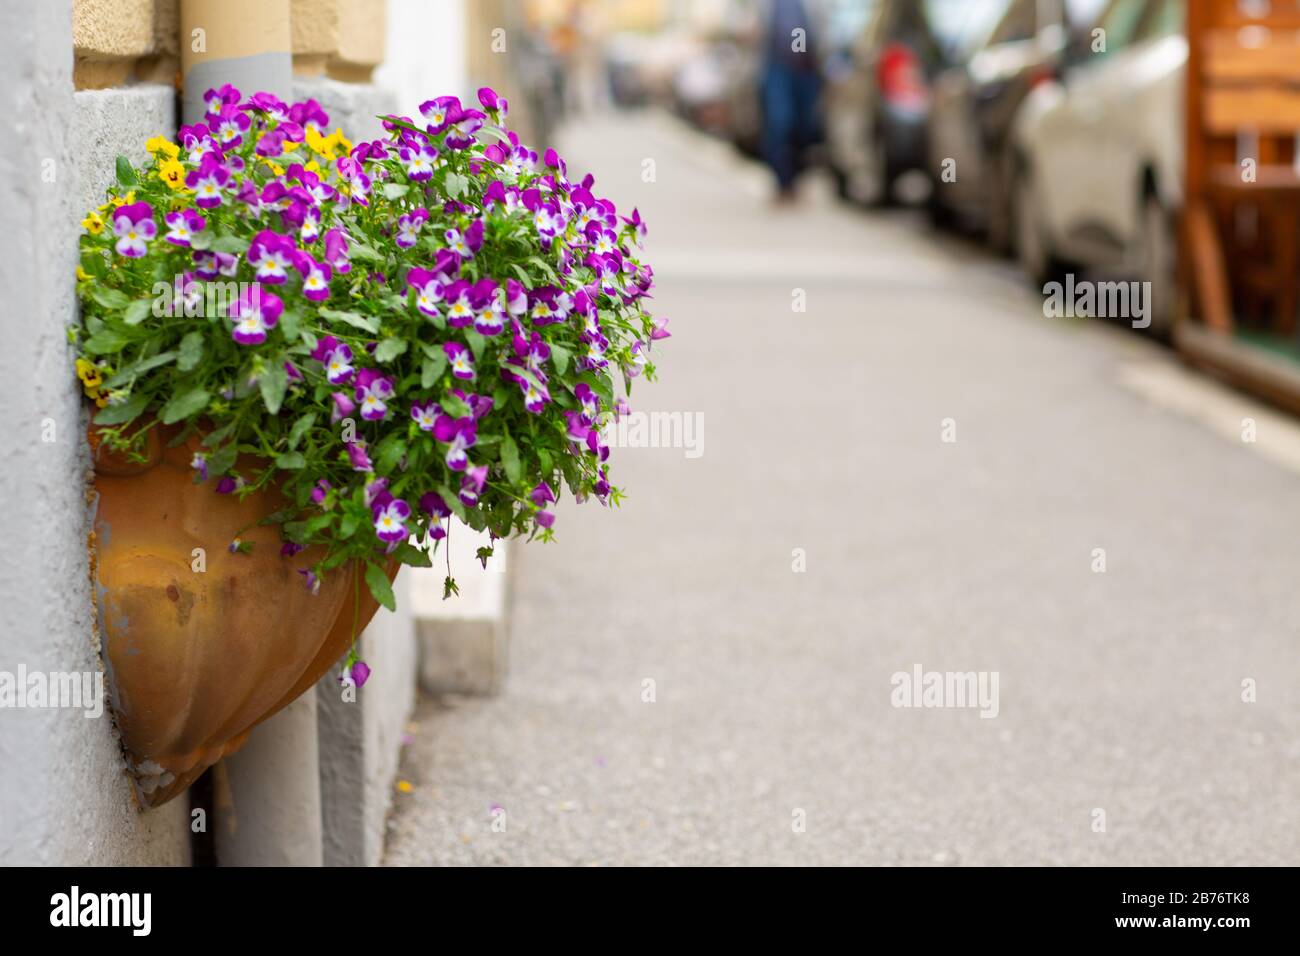 Colorful purple pansies flowers on a city street. Blooming violet and yellow Petunia in a hanging retro planter, ceramic pot on the street. Floral lan Stock Photo